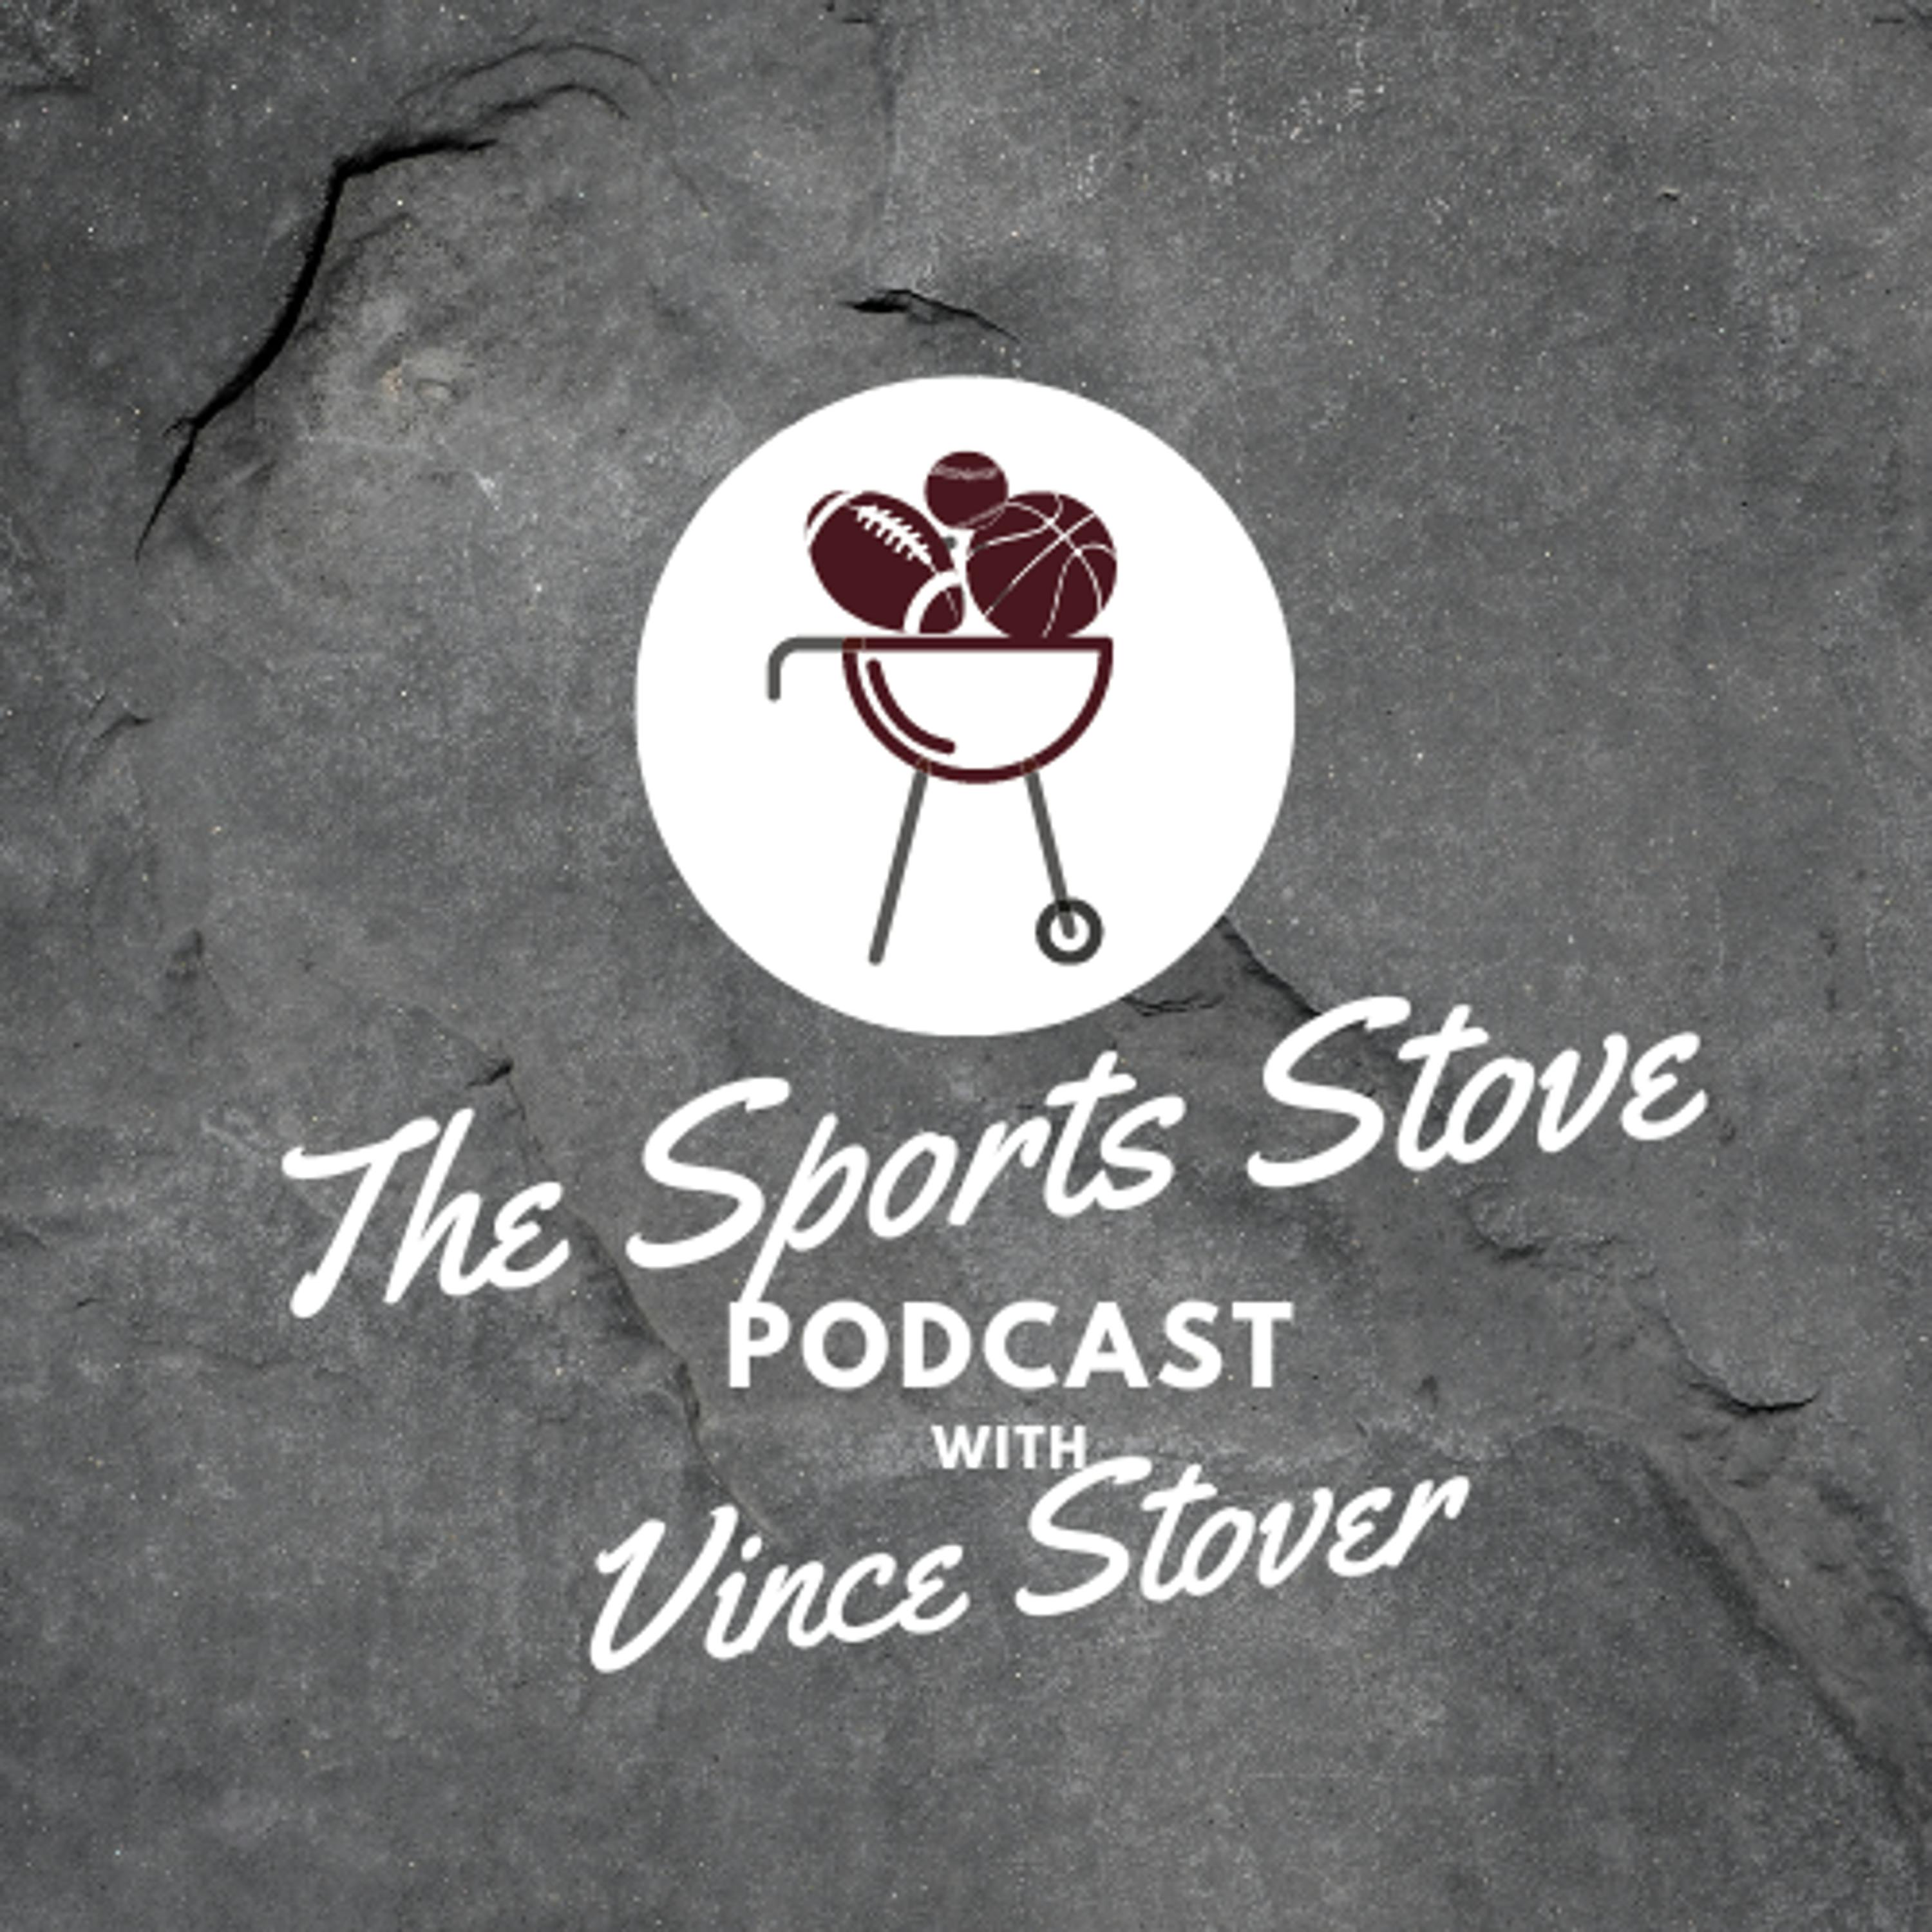 The Sports Stove Podcast